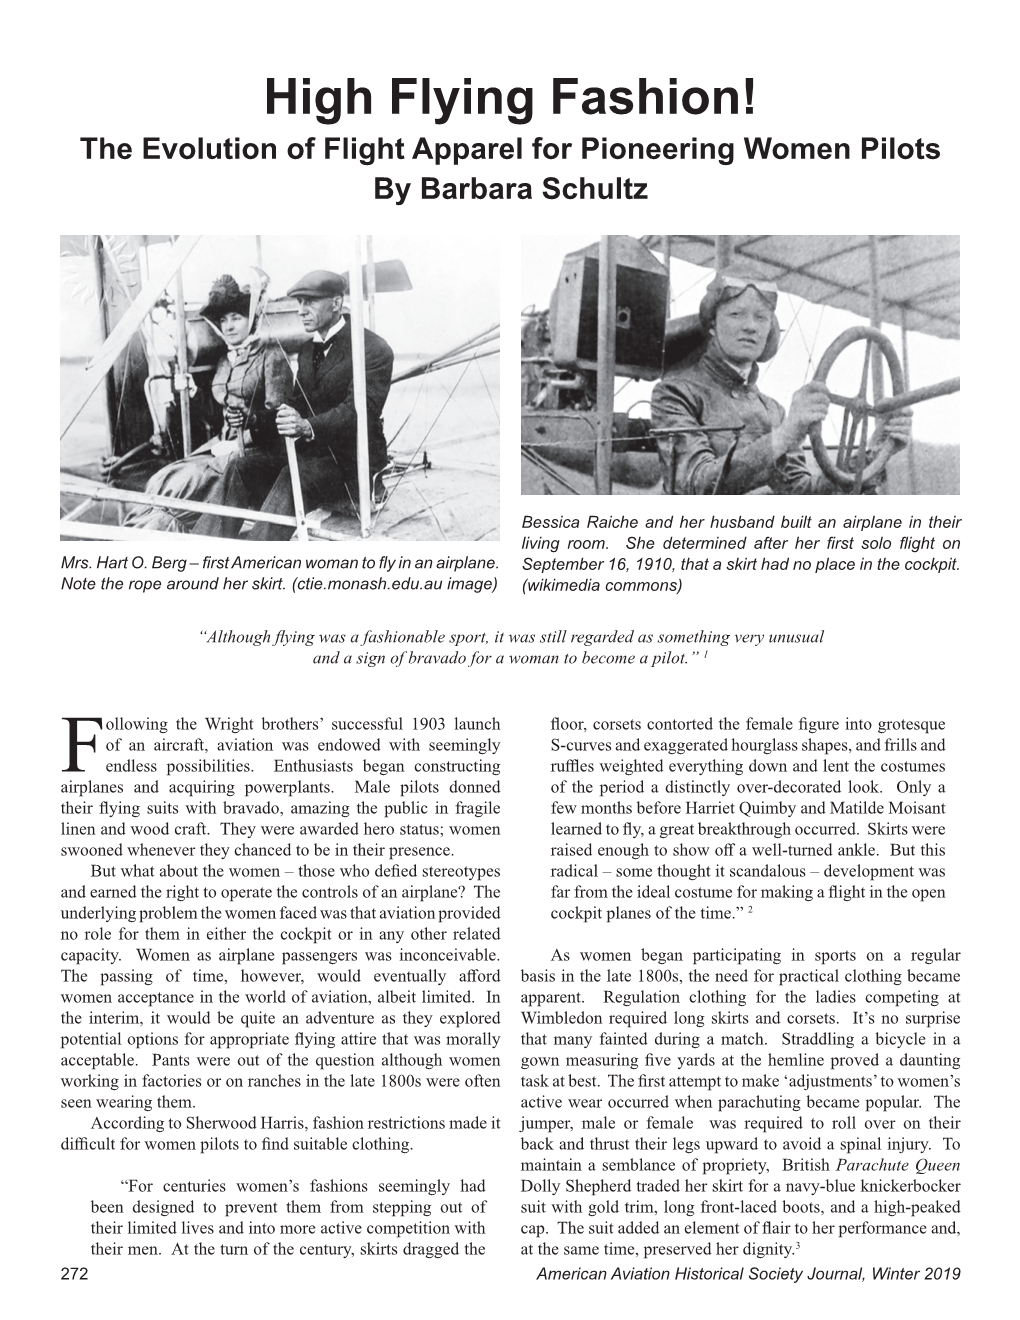 High Flying Fashion! the Evolution of Flight Apparel for Pioneering Women Pilots by Barbara Schultz